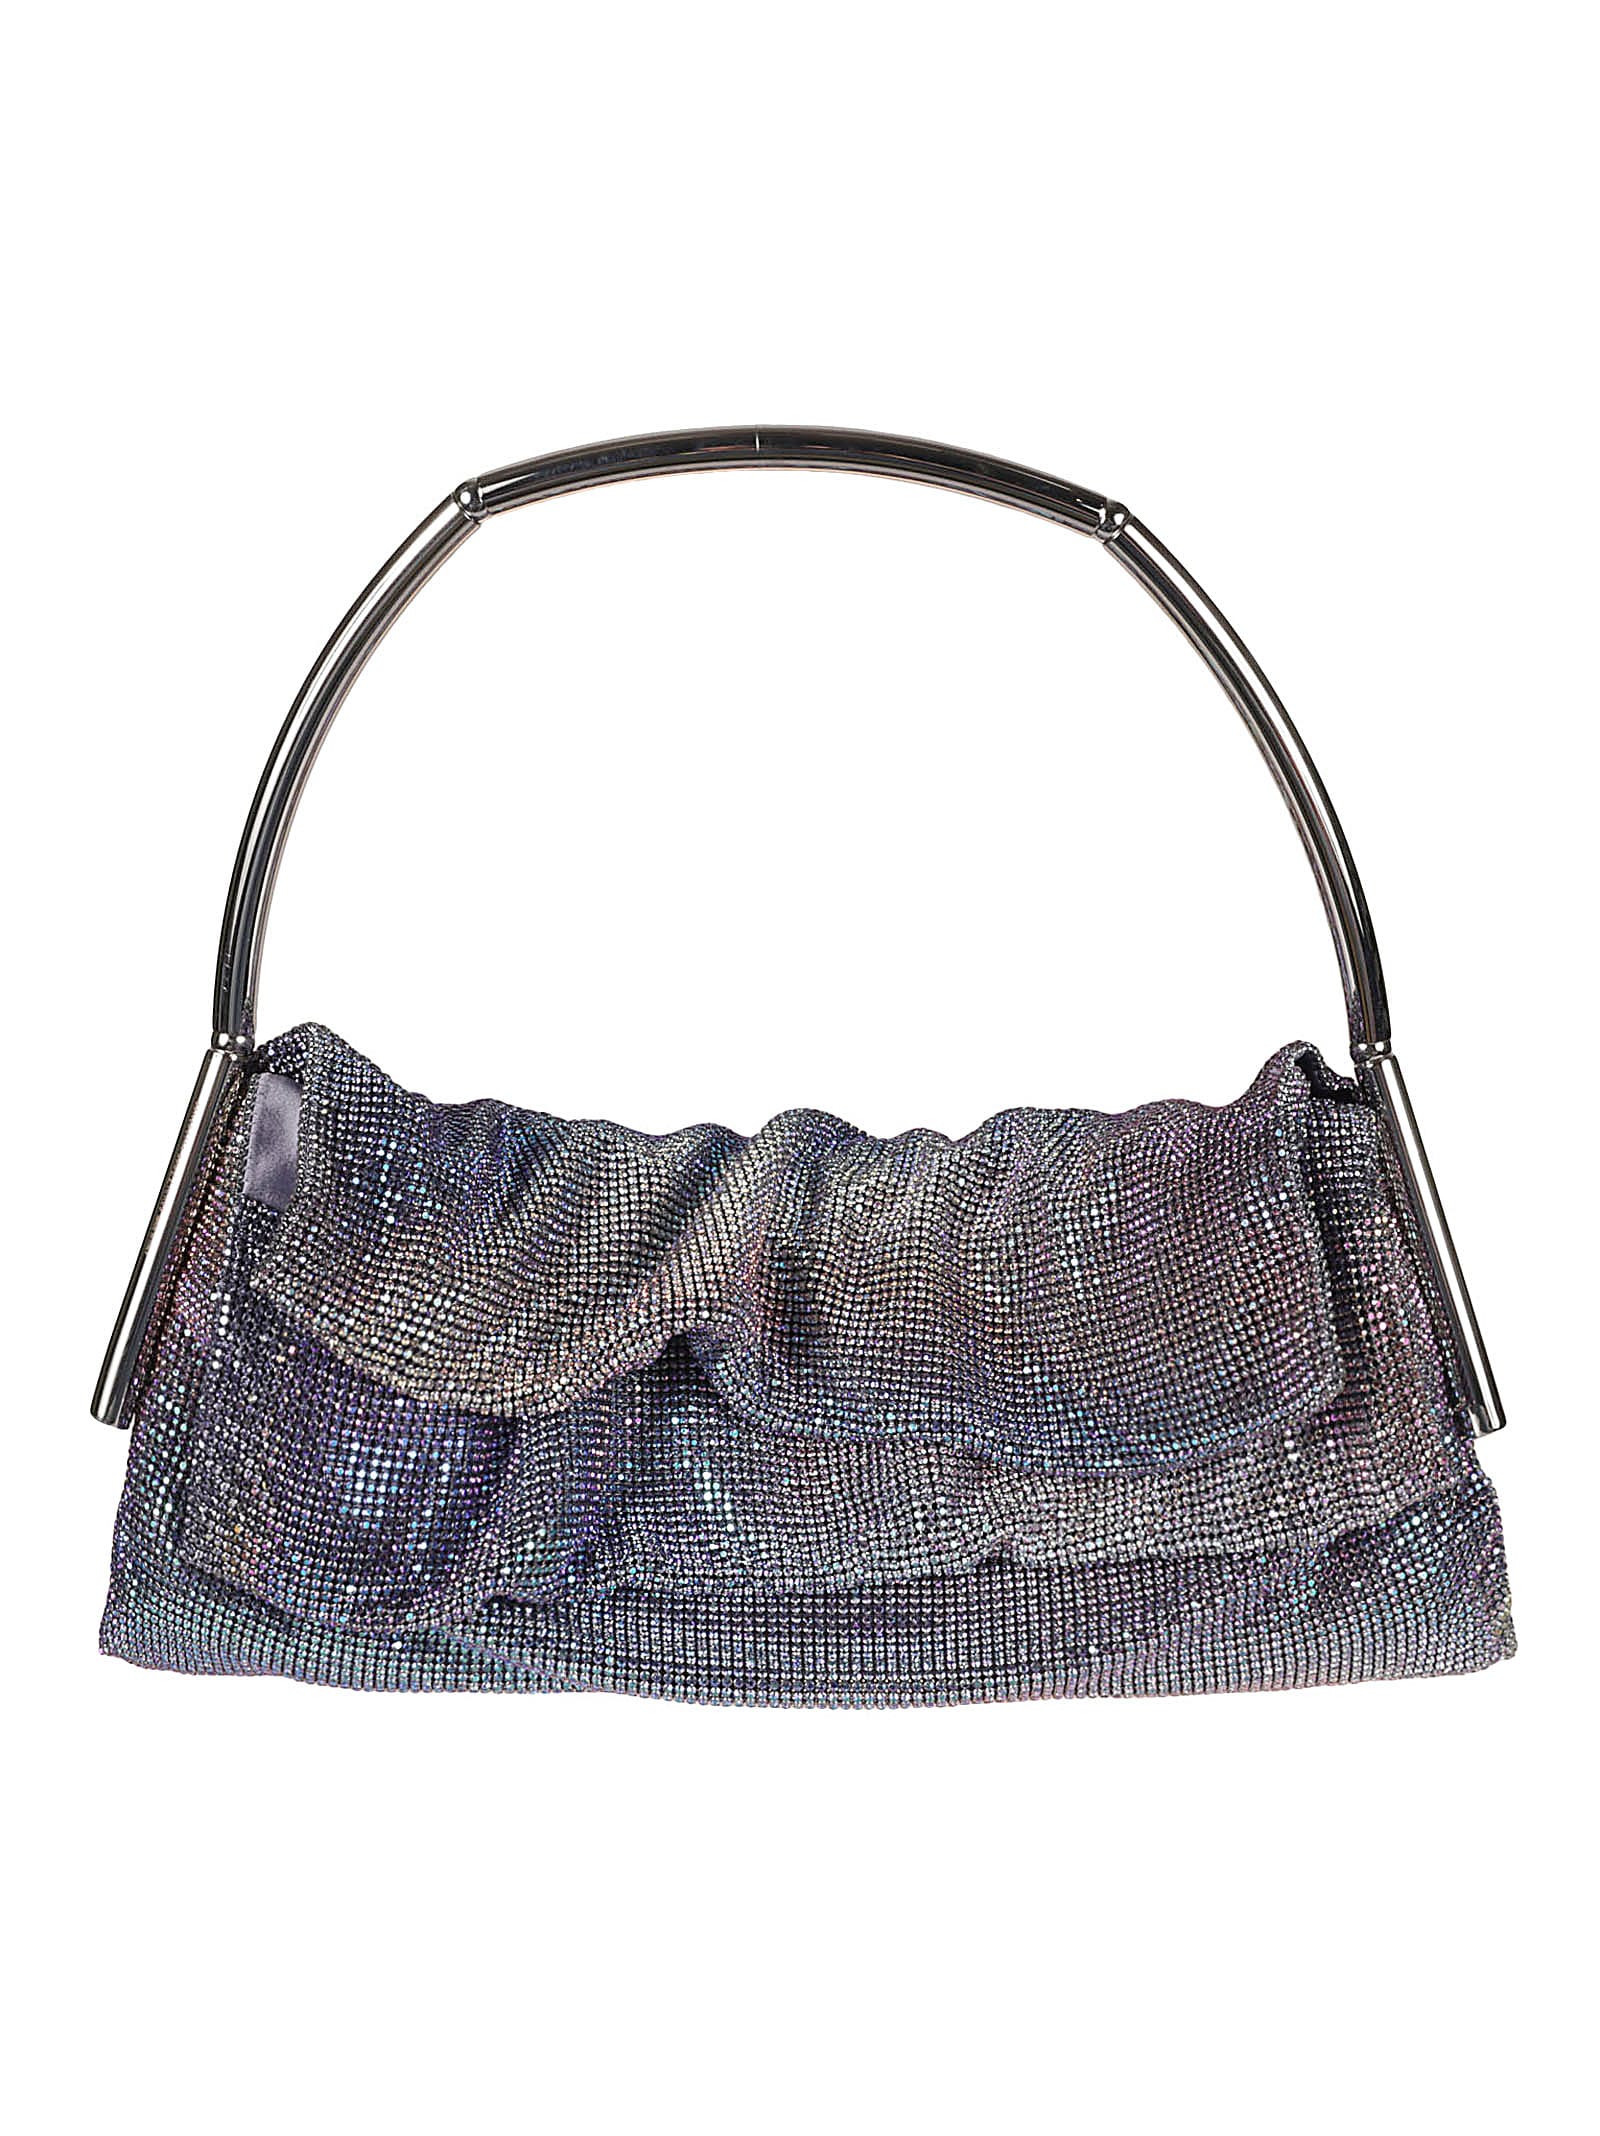 Shop Benedetta Bruzziches Metallic Handle Embellished All-over Tote In Spectre